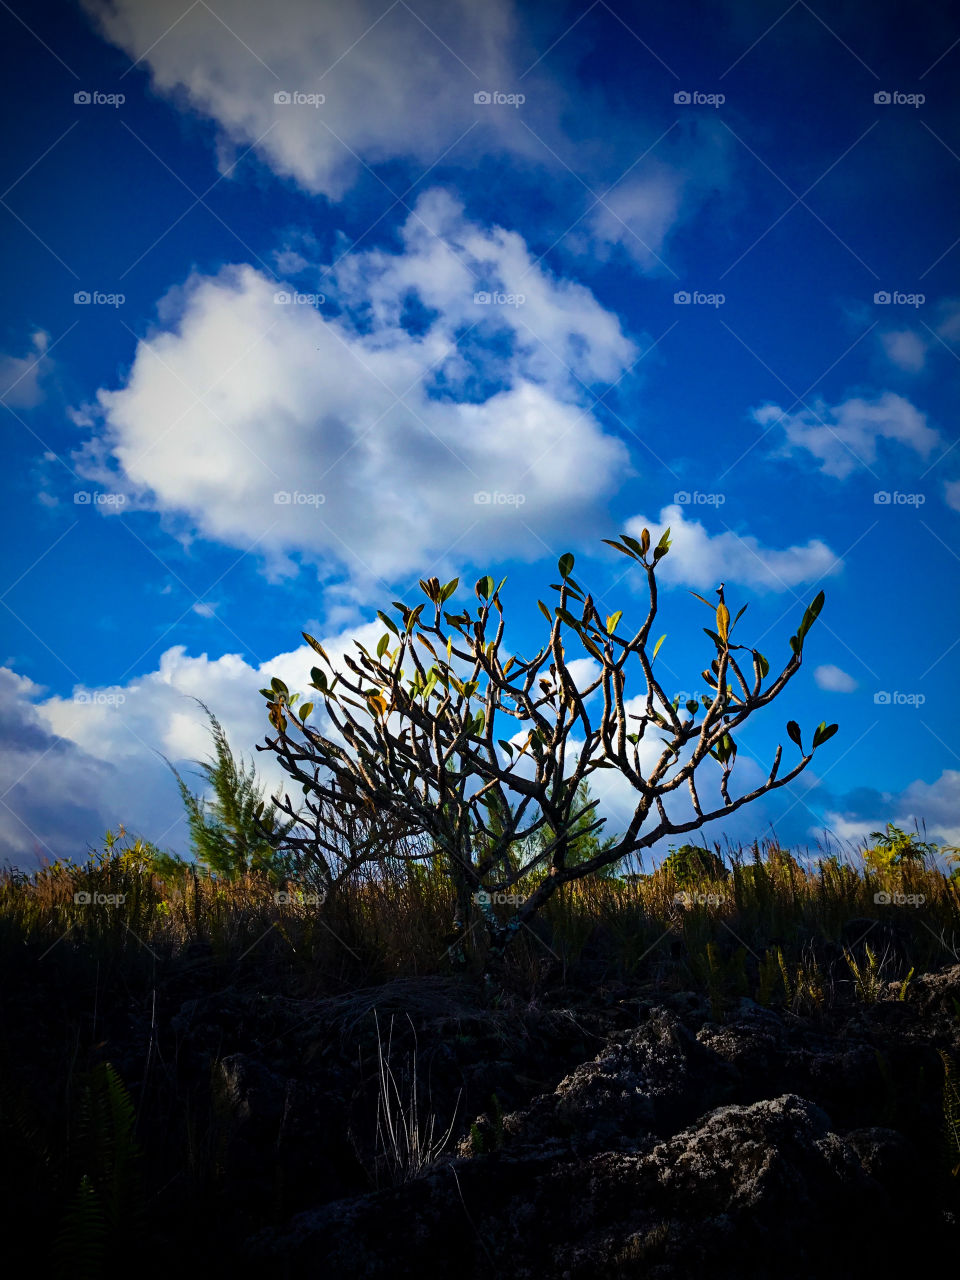 Plumeria tree reaching for the clouds